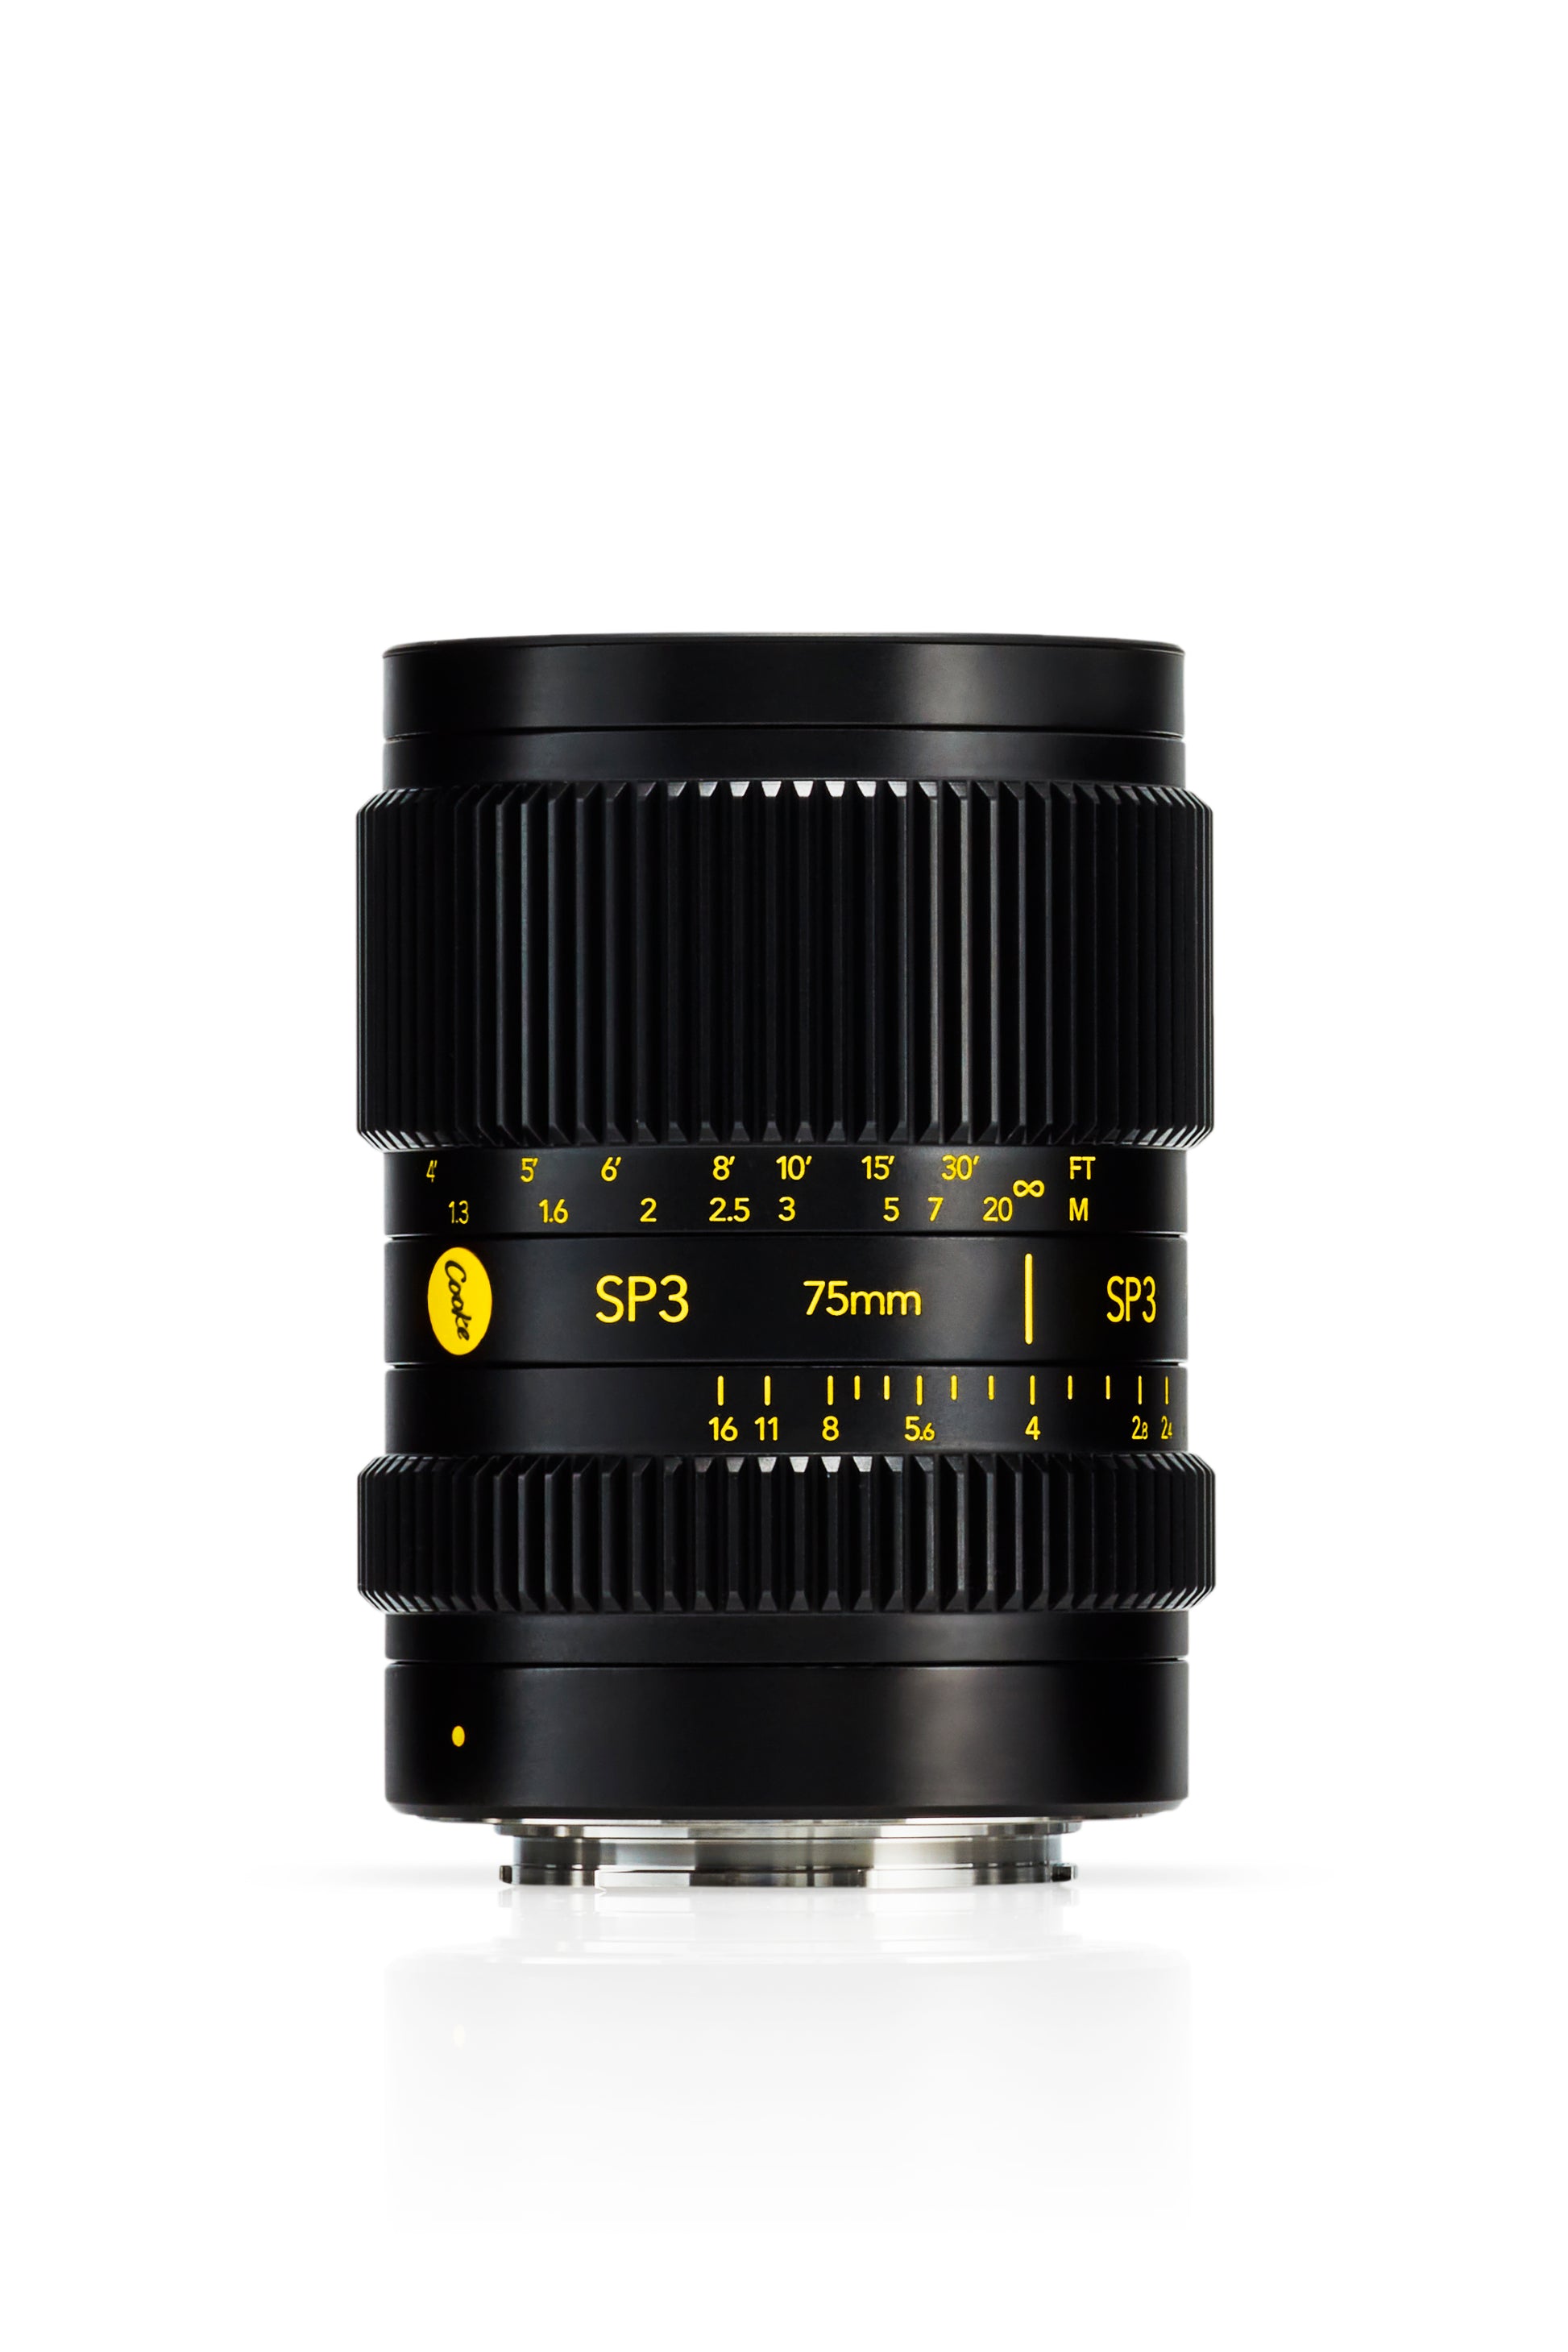 Cooke SP3 Prime Lens Series (25/32/50/75/100mm, Sony E-mount) - HD Source